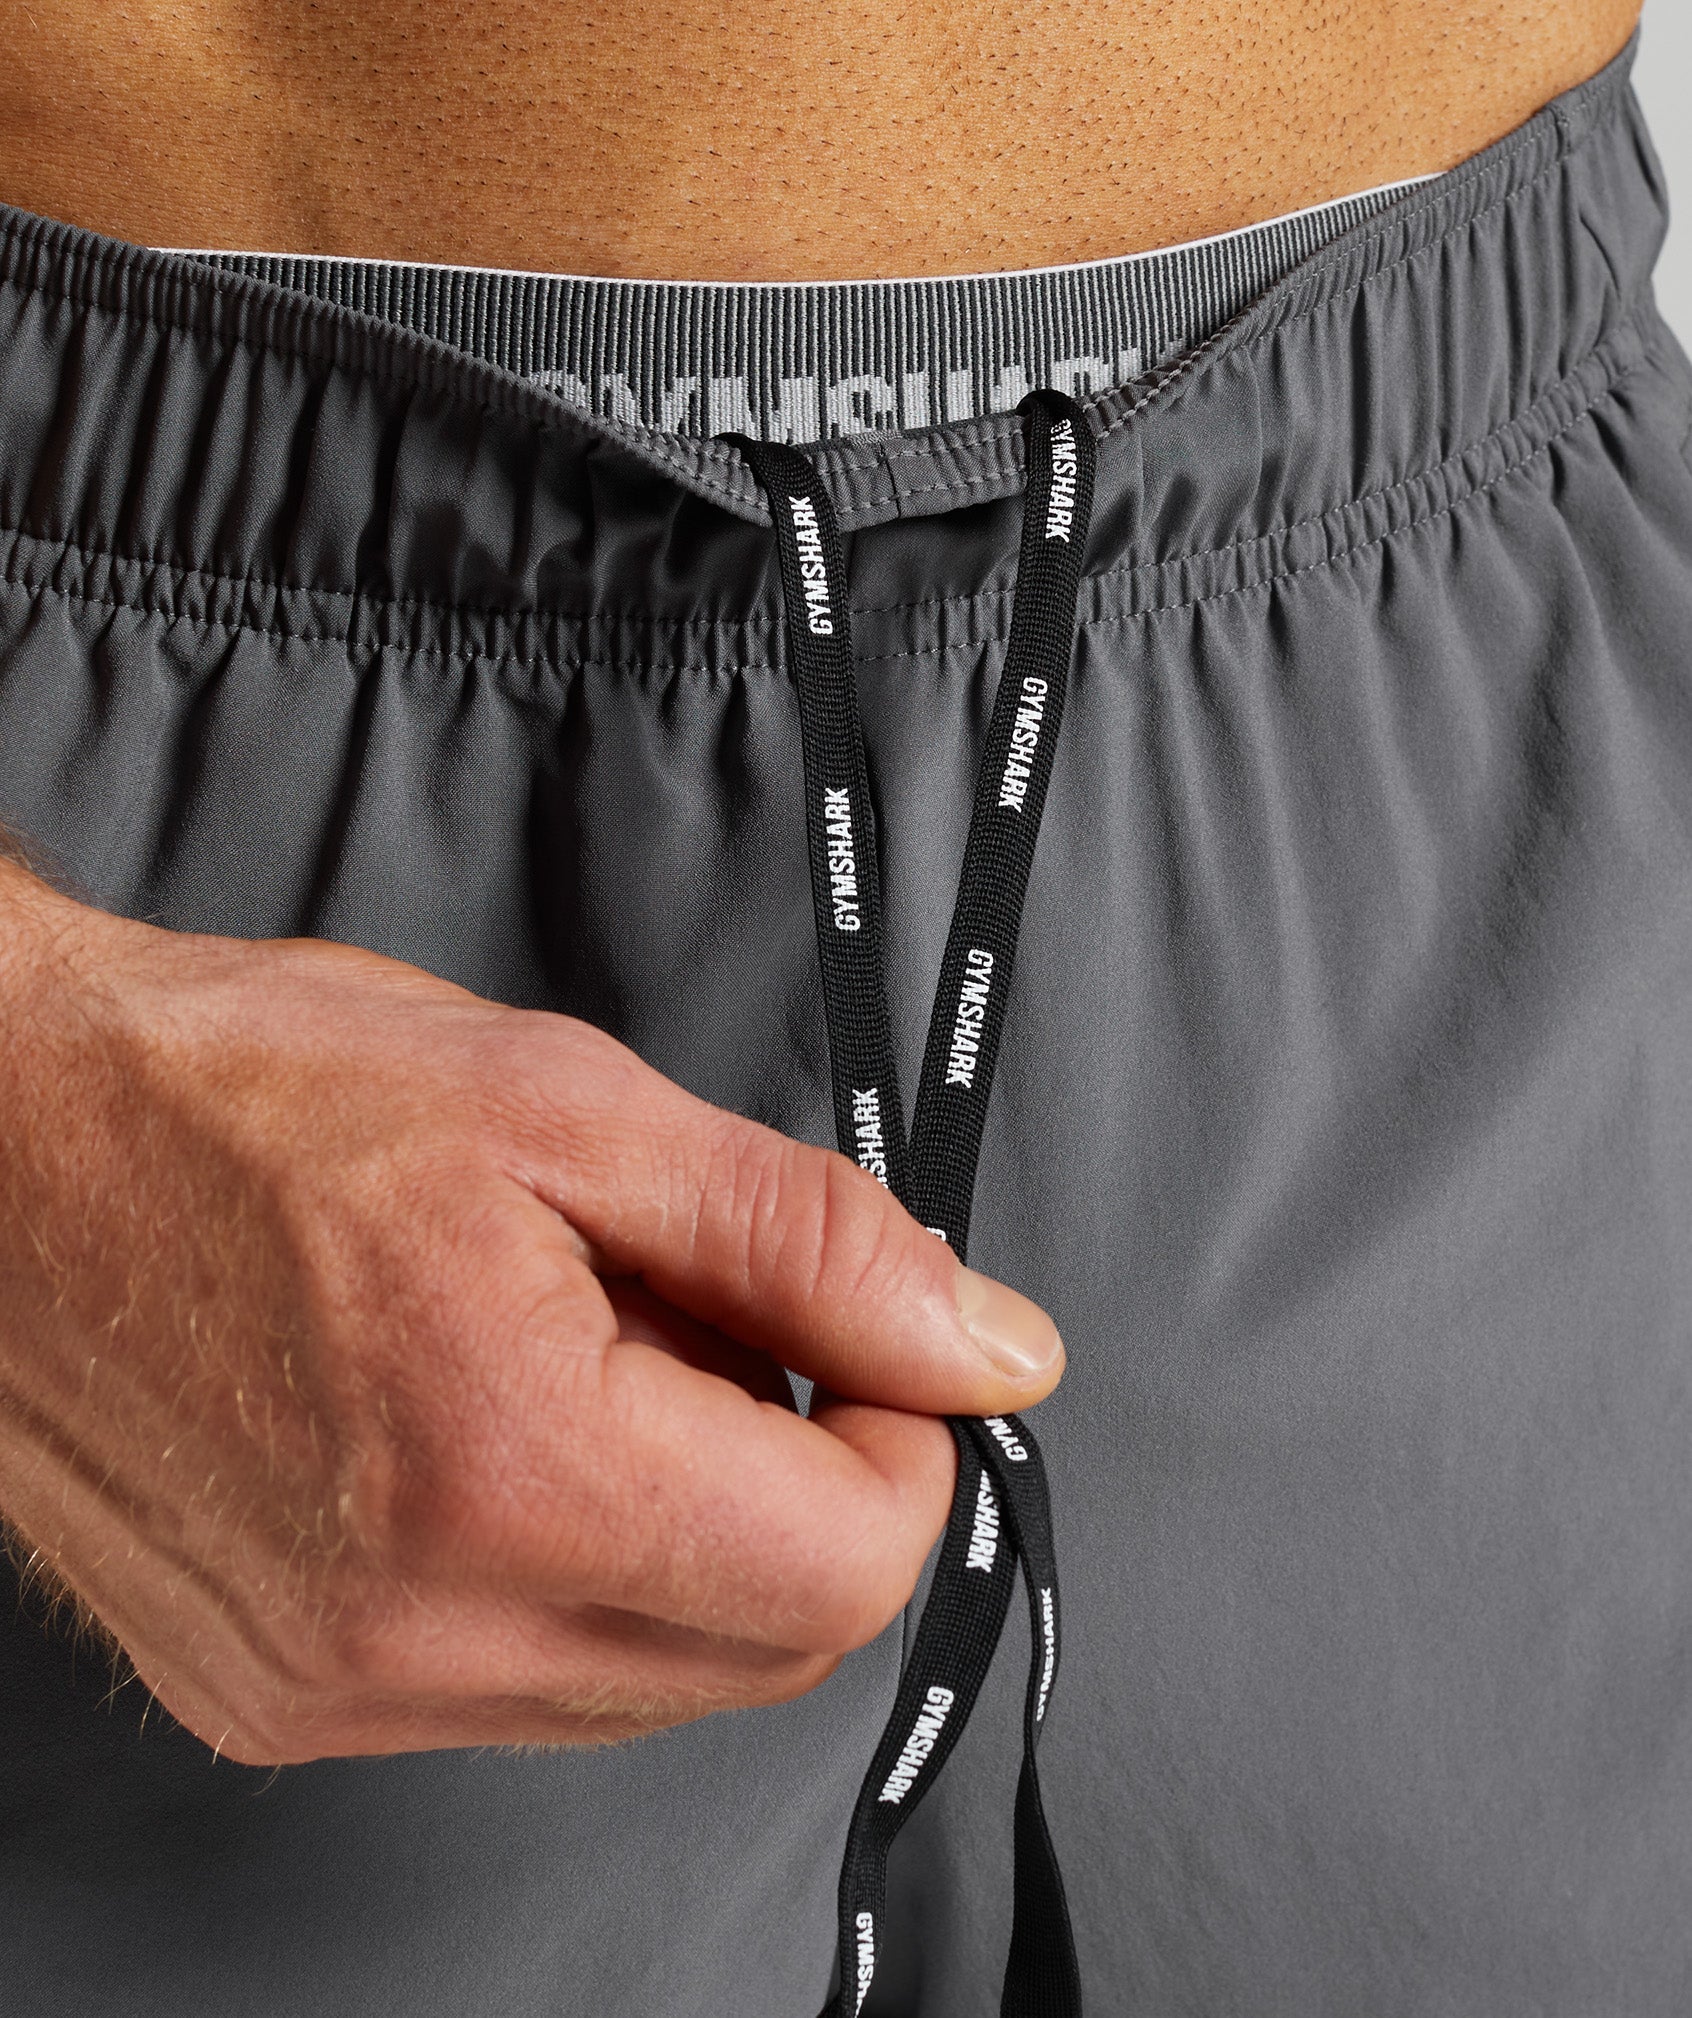 Sport Shorts in Silhouette Grey/Black - view 5